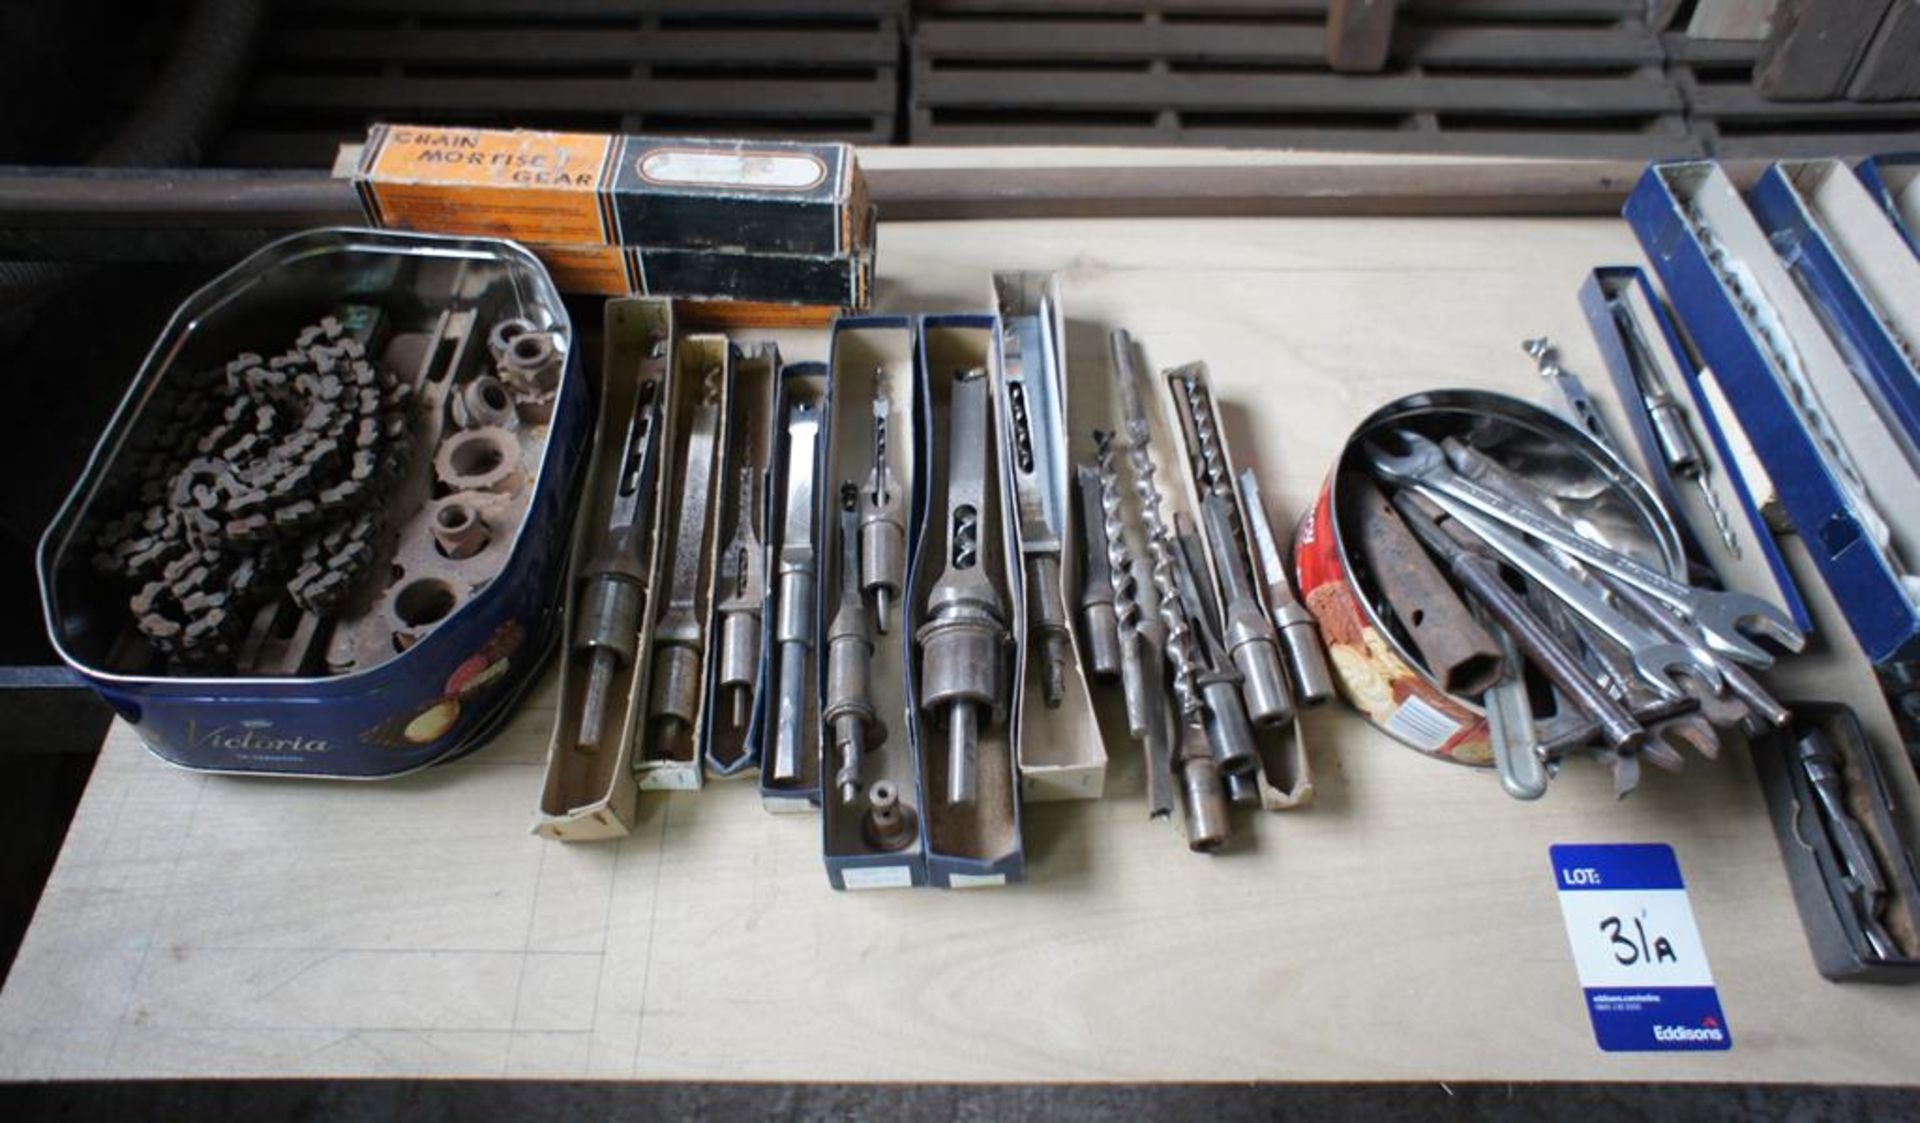 Wadkin MF Chain & Chisel Morticer, Tooling and contents of Cabinet - Image 8 of 19